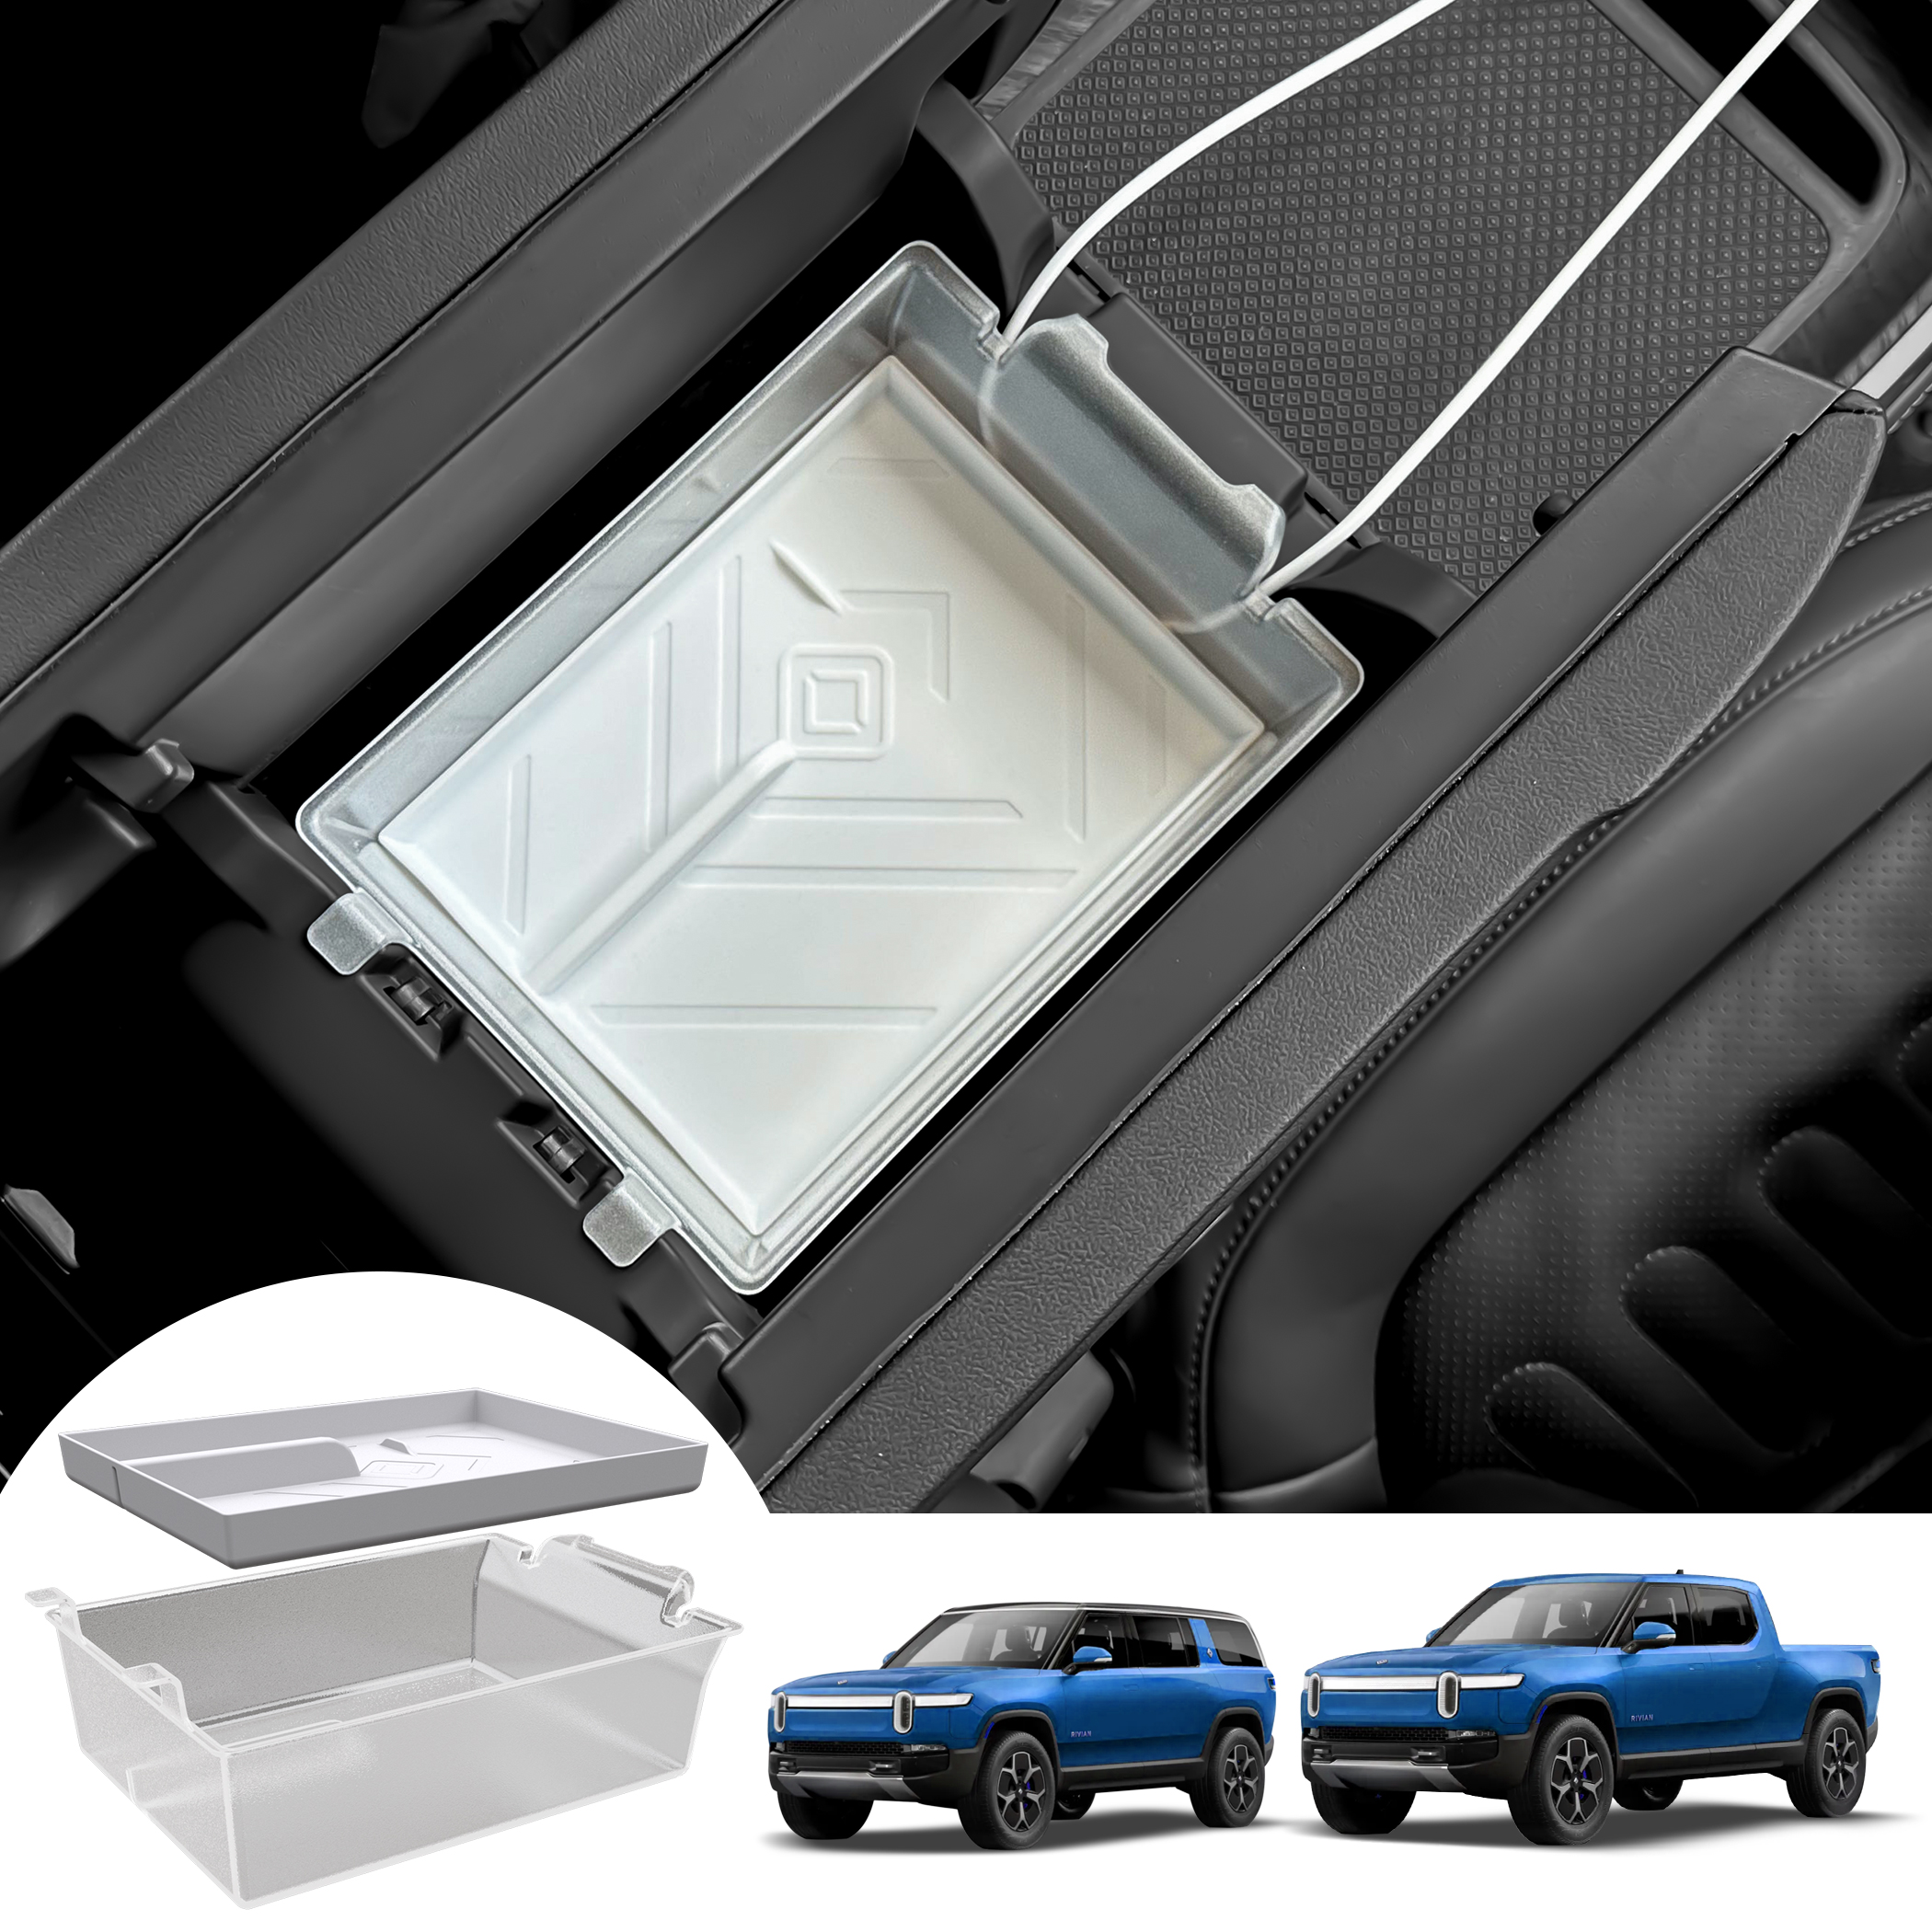 Rivian R1T R1S Seeking 5 Volunteers for Rivian R1S/R1T Center Console Organizer Video Test – Free Product + Extra Reward! 1